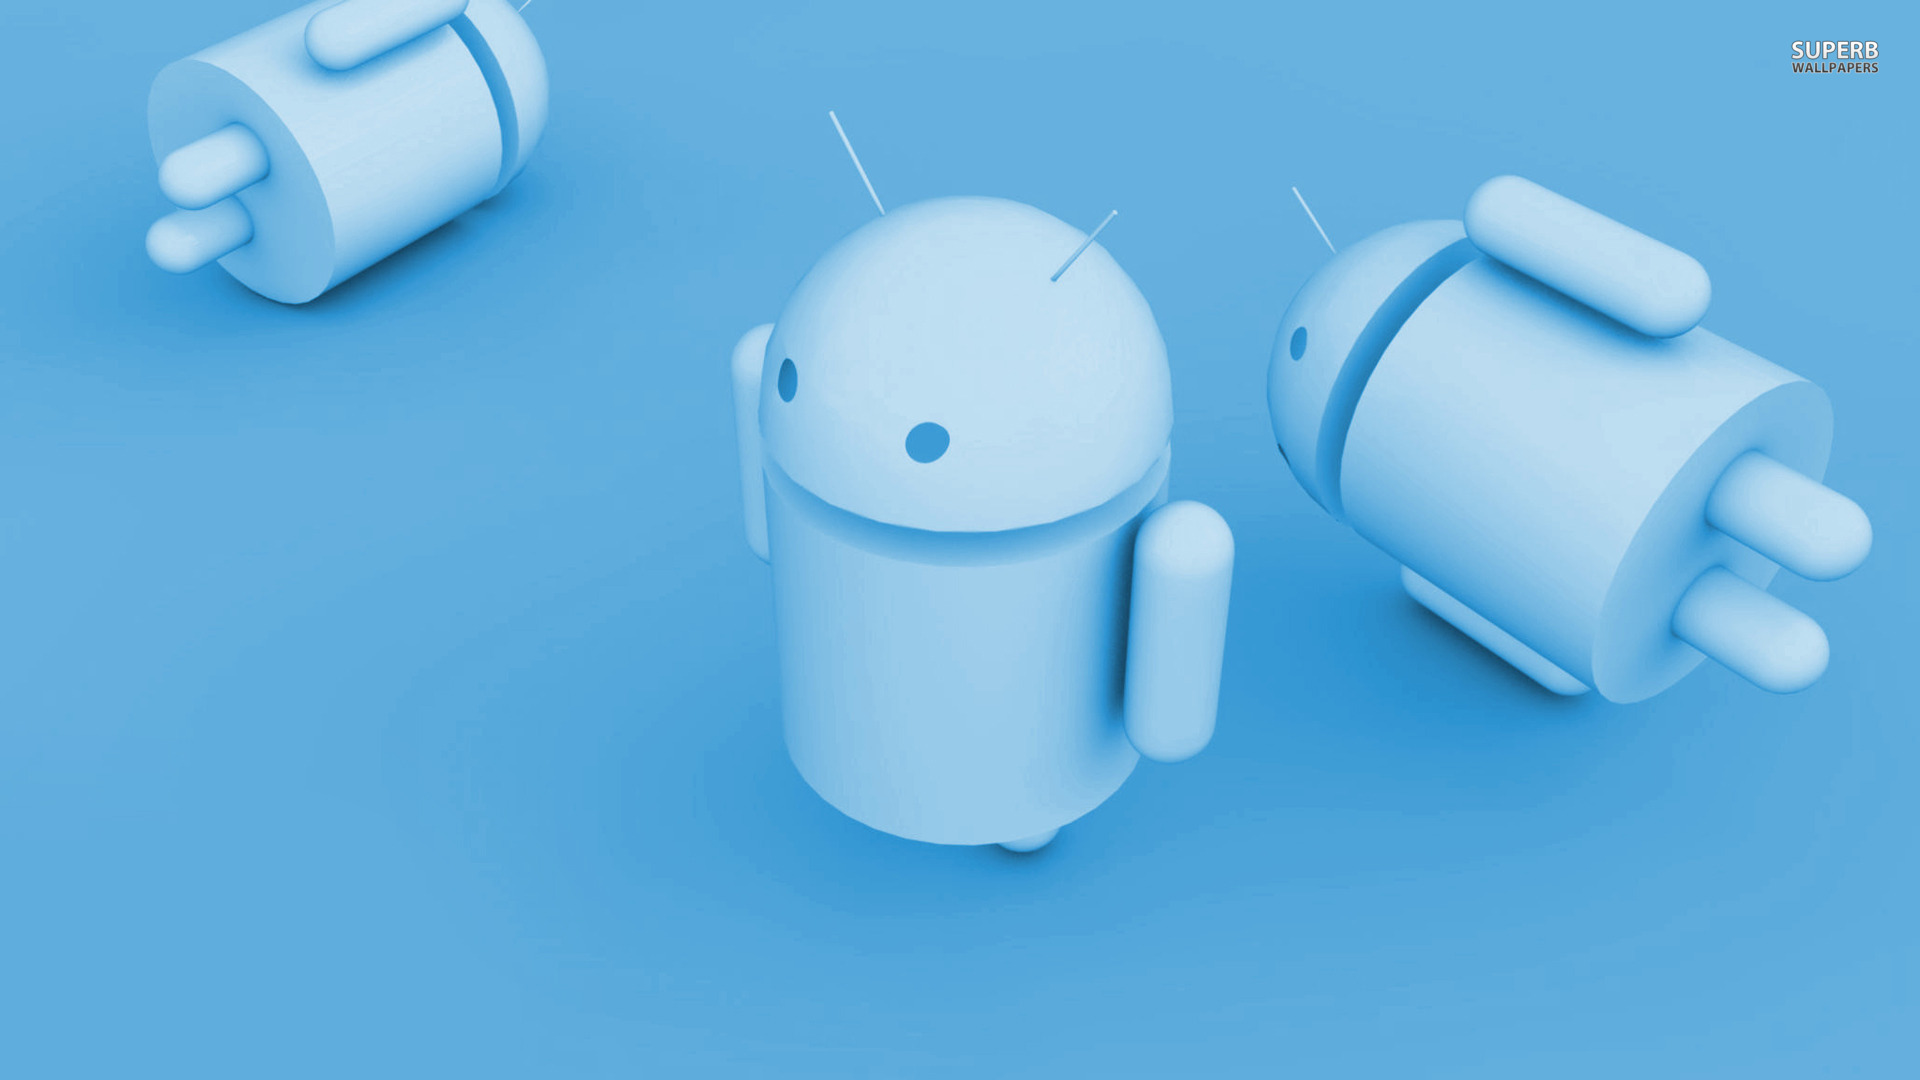 Android In Blue Wallpaper MixHD